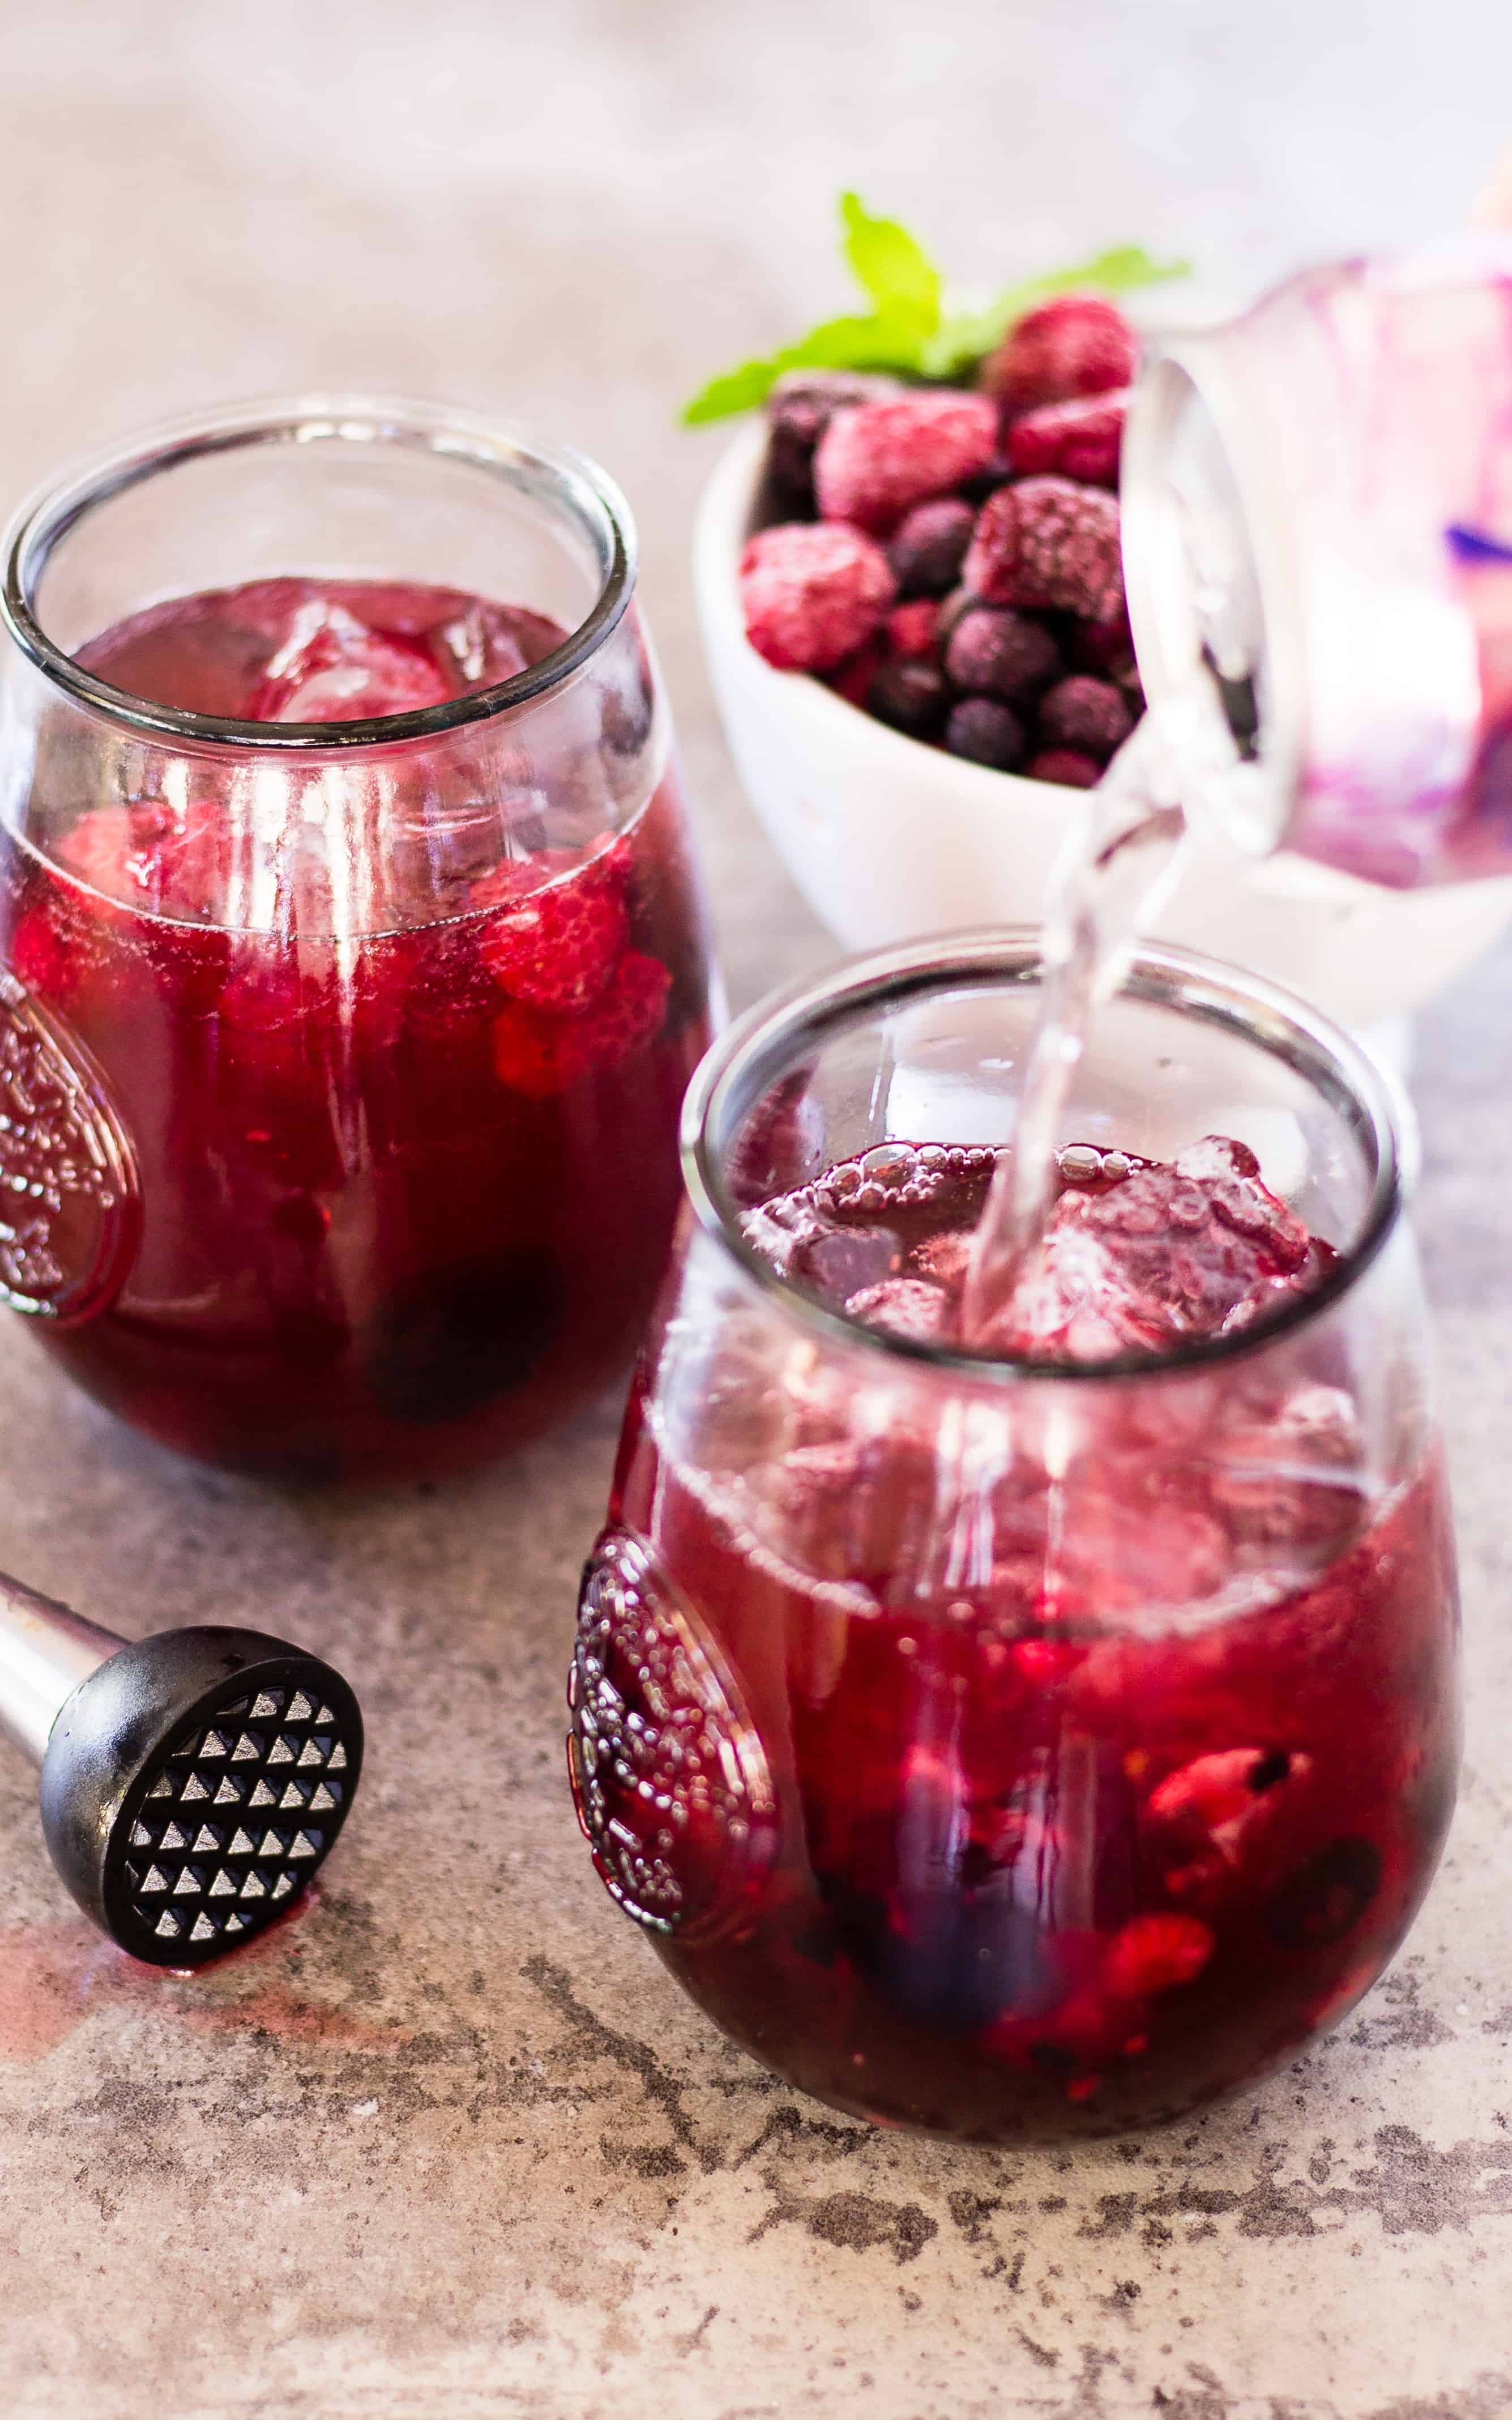 Sparkling Water makes the Skinny Sangria Spritzer | Take Two Tapas | #Sangria #Spritzer #SkinnyCocktails #WineCocktails #EasyCocktails #SimpleCocktails